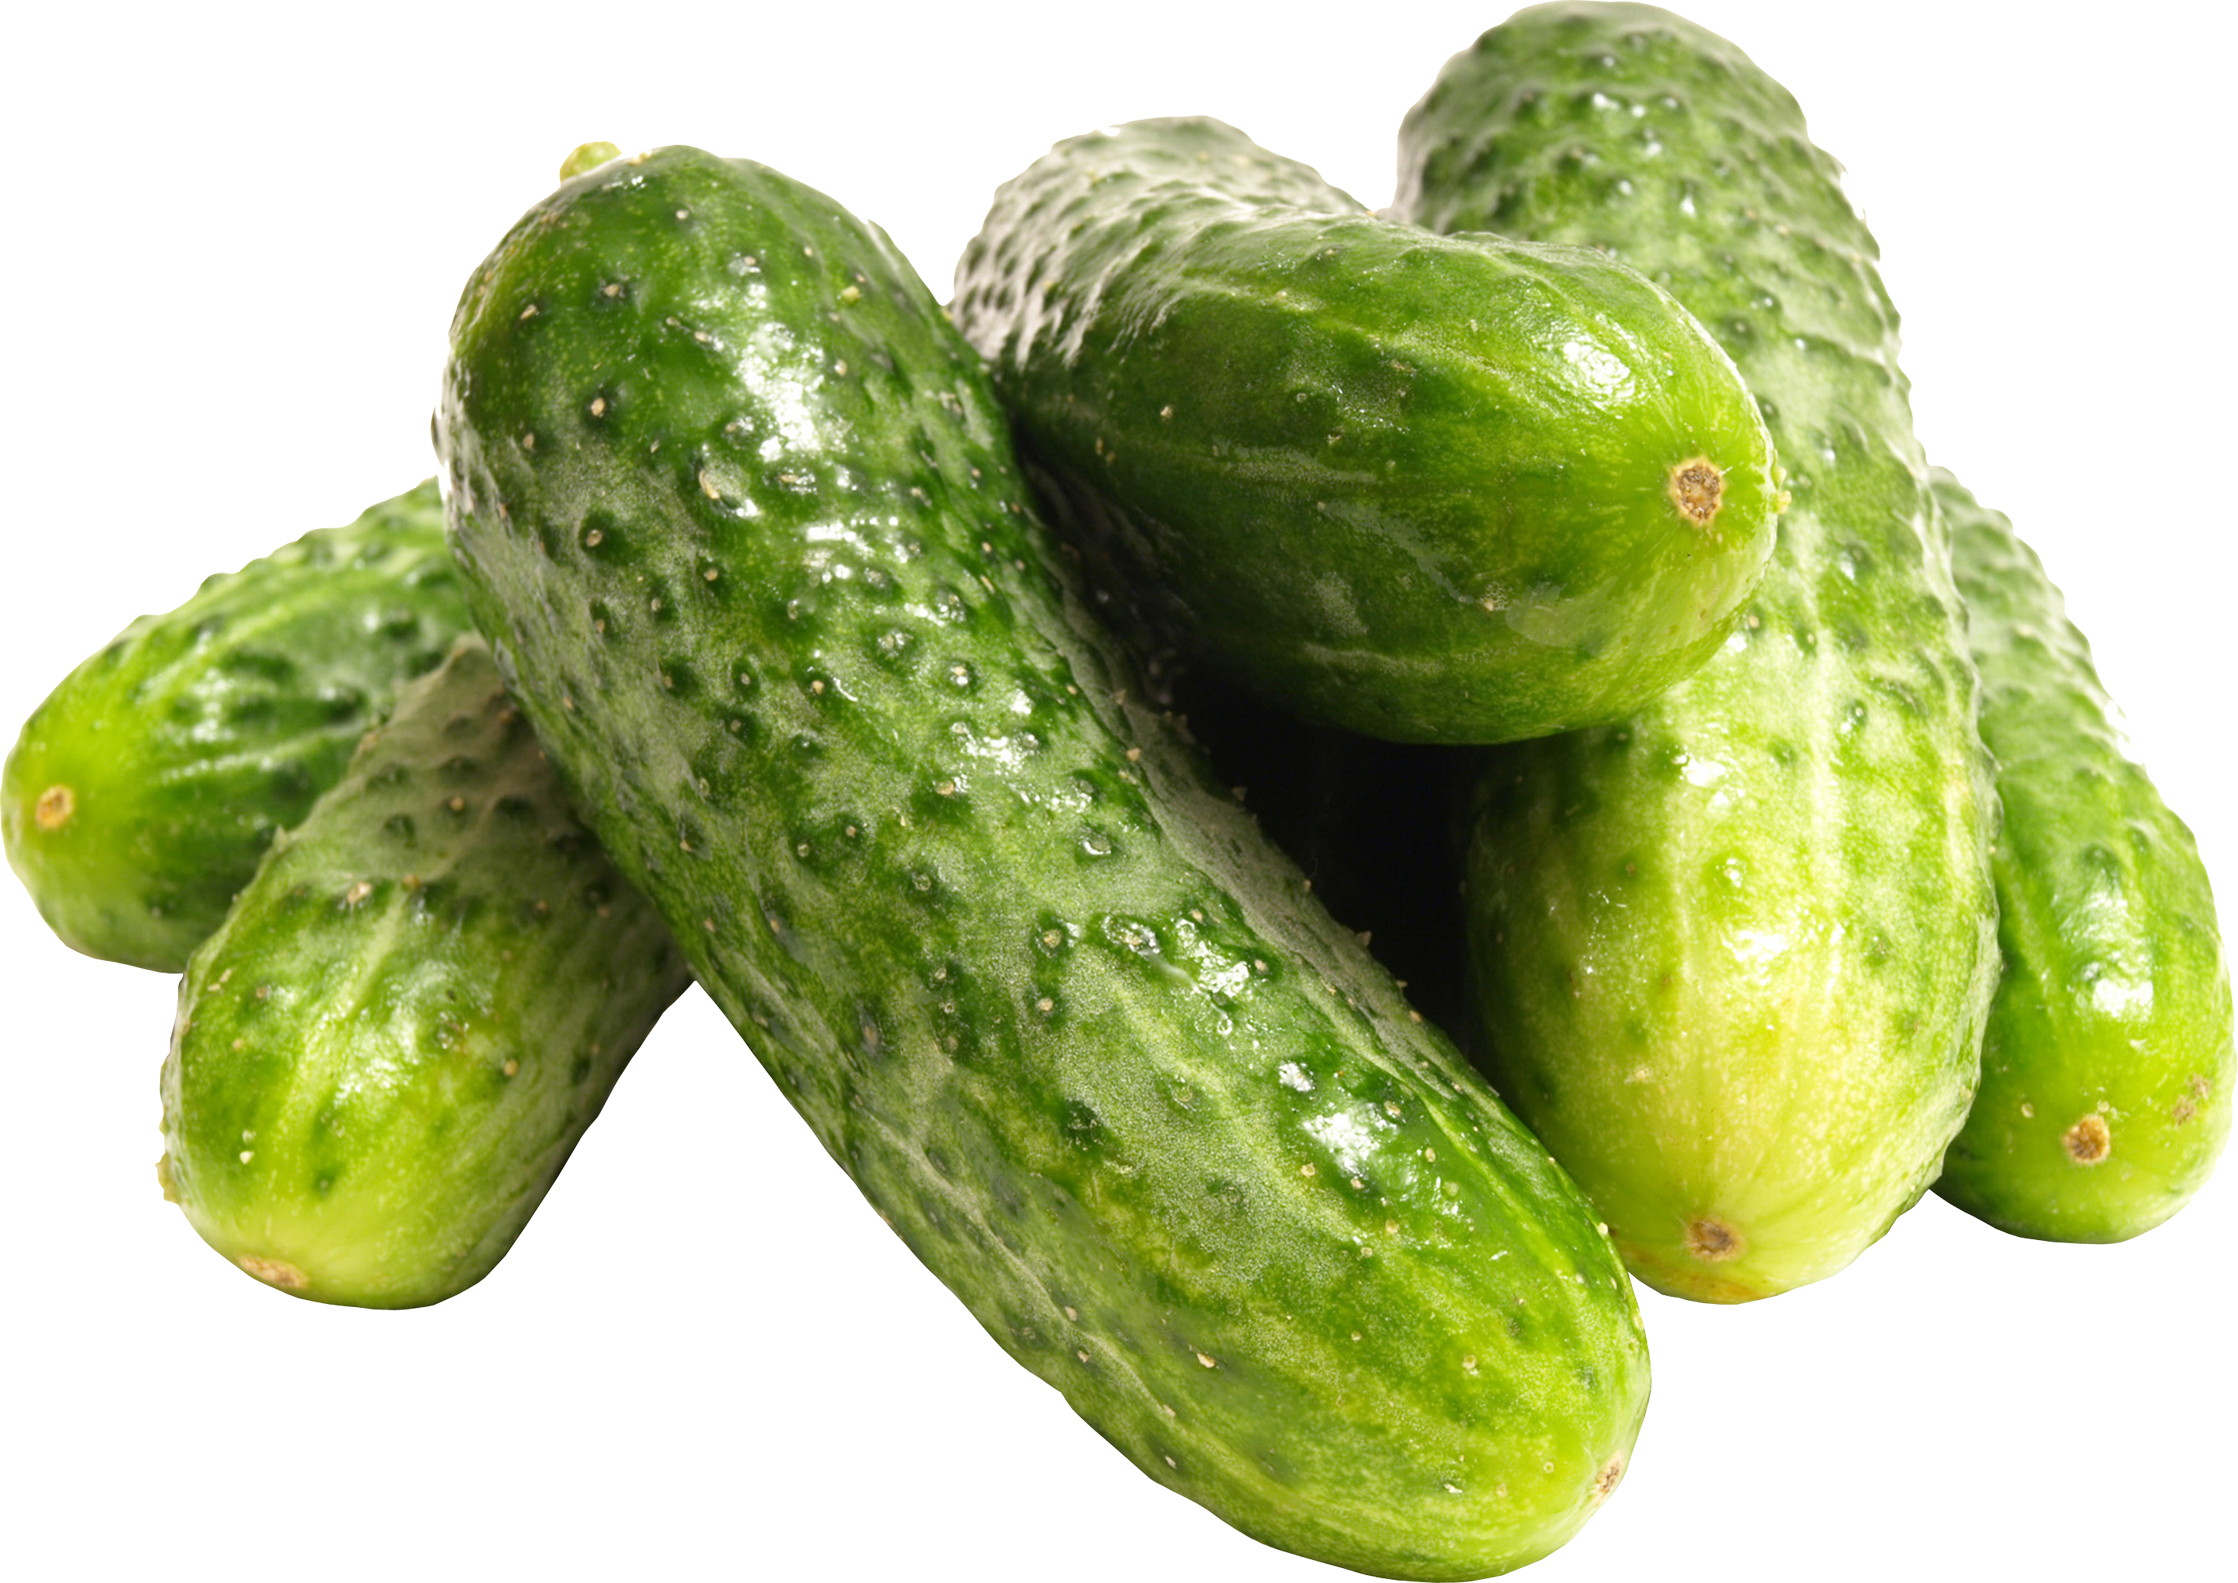 Several cucumbers PNG